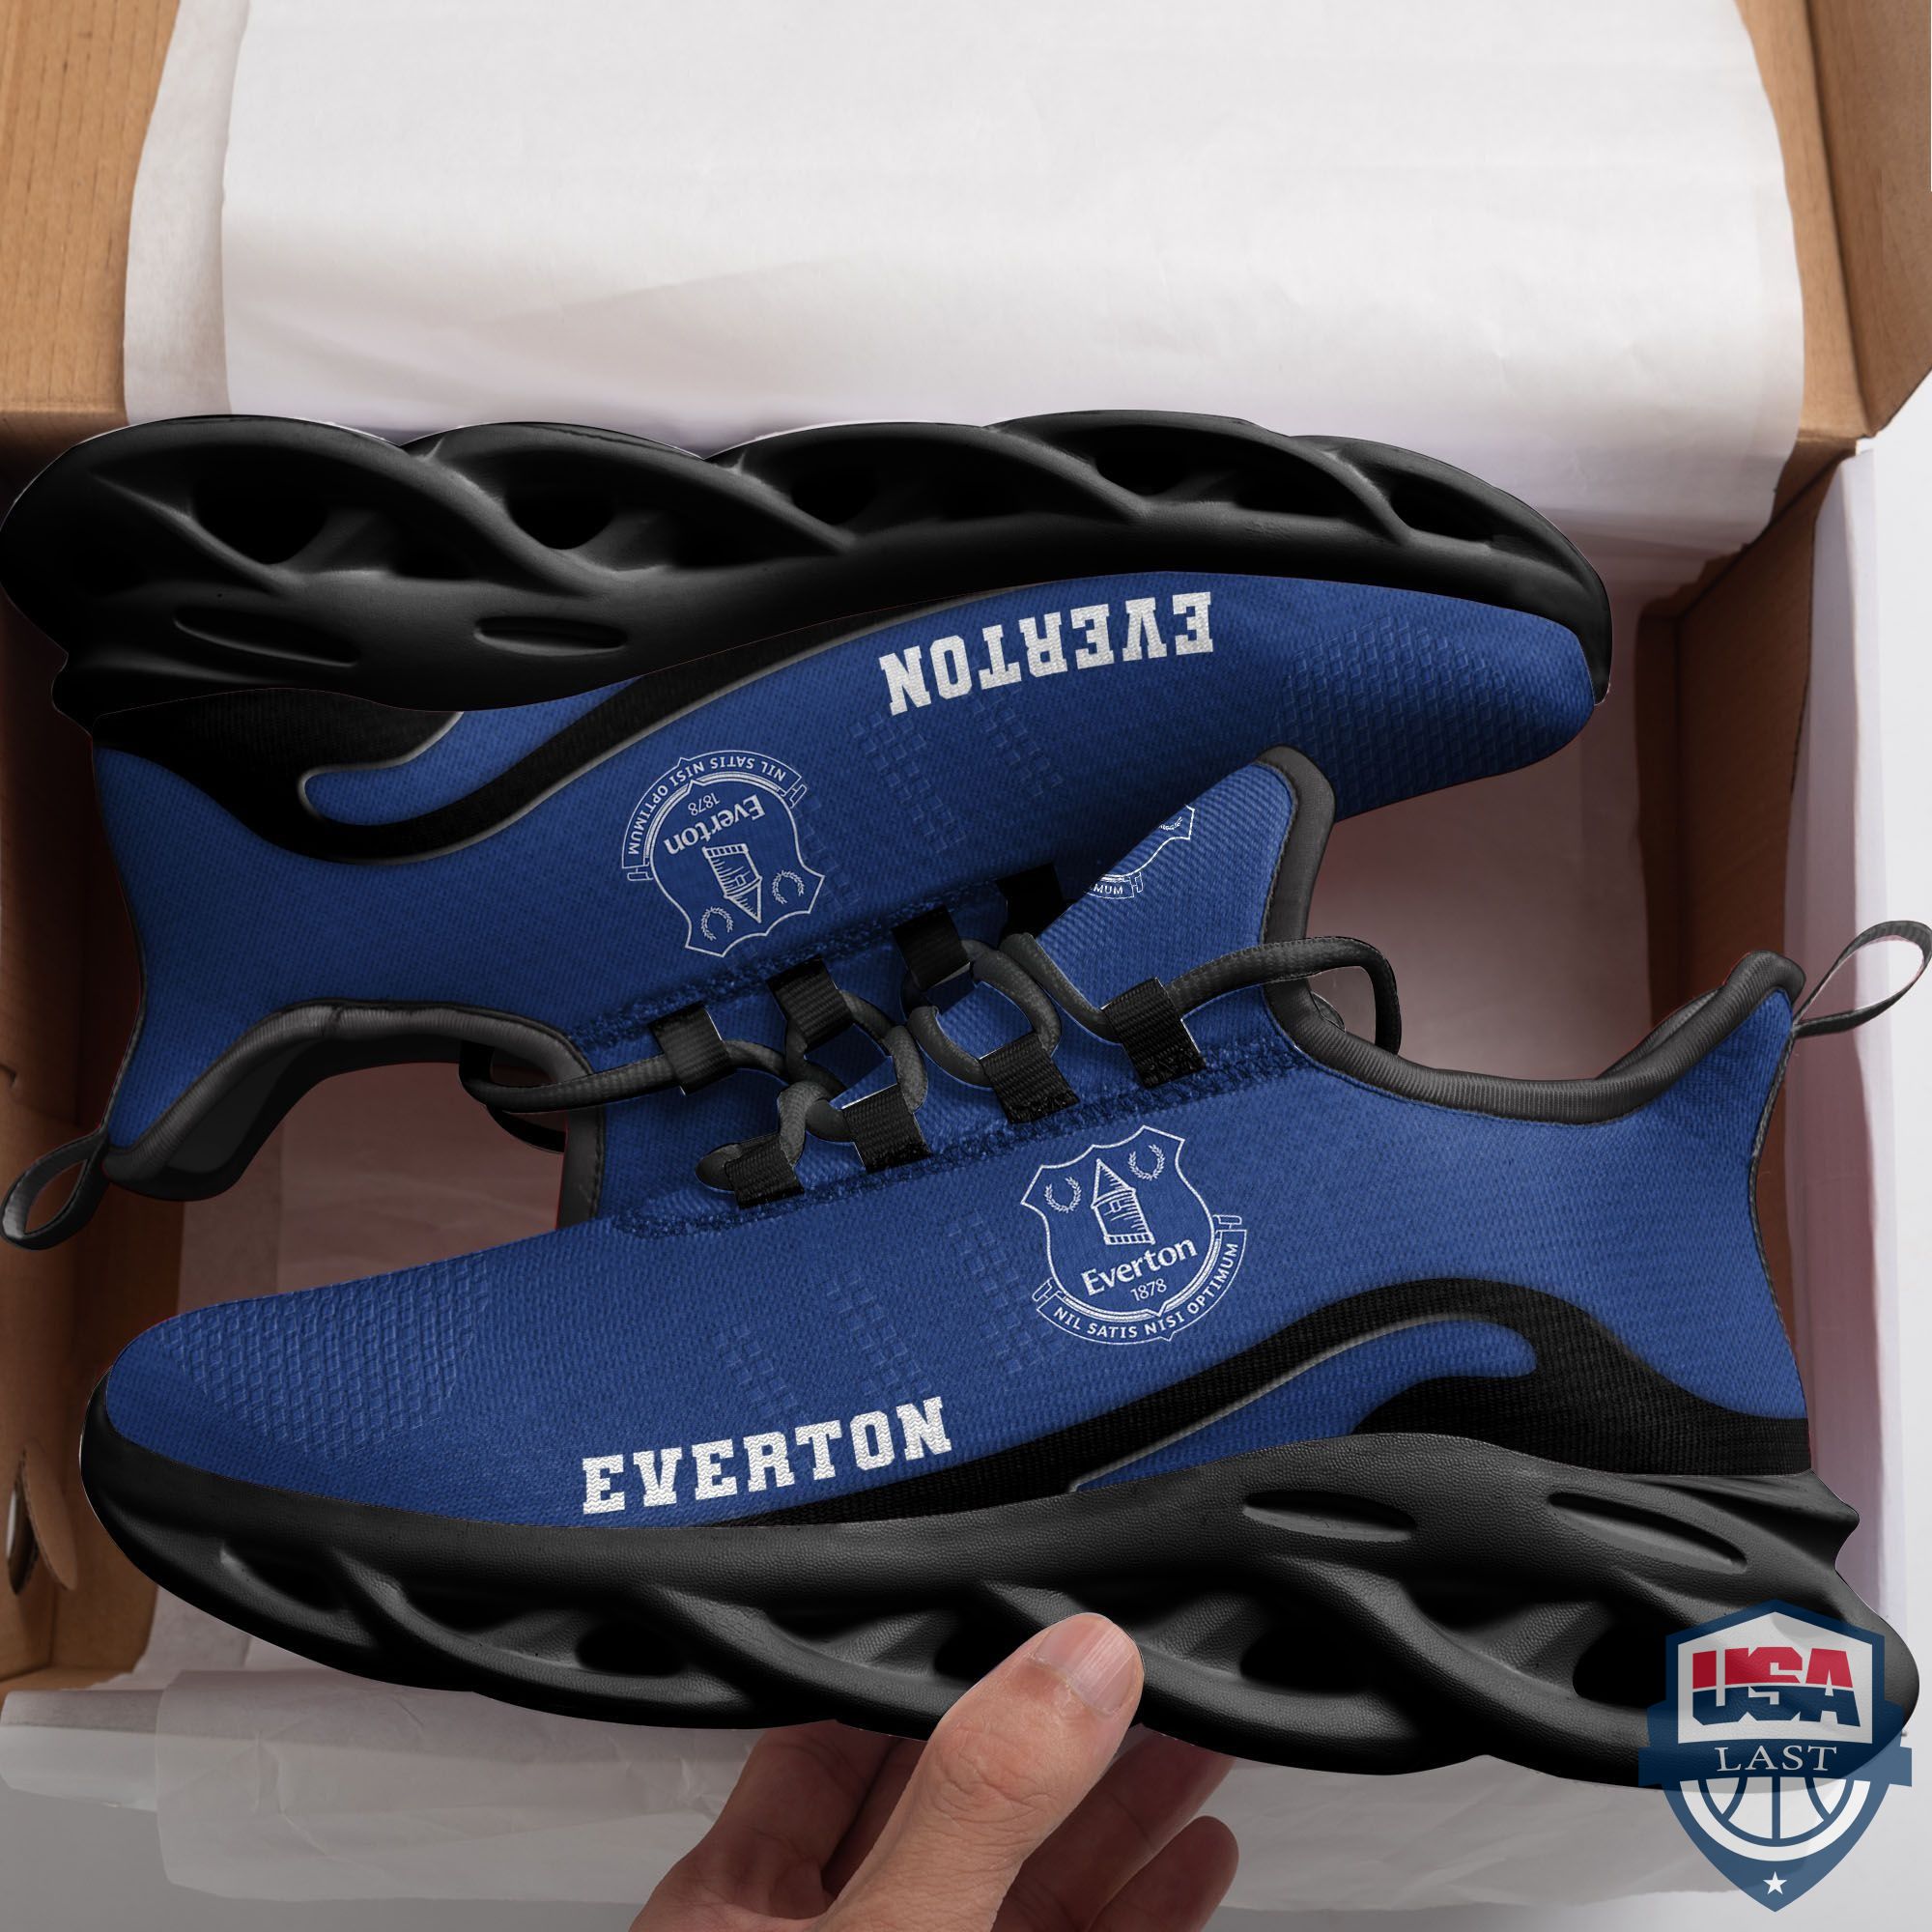 EPL Everton Max Soul Clunky Sneaker Shoes